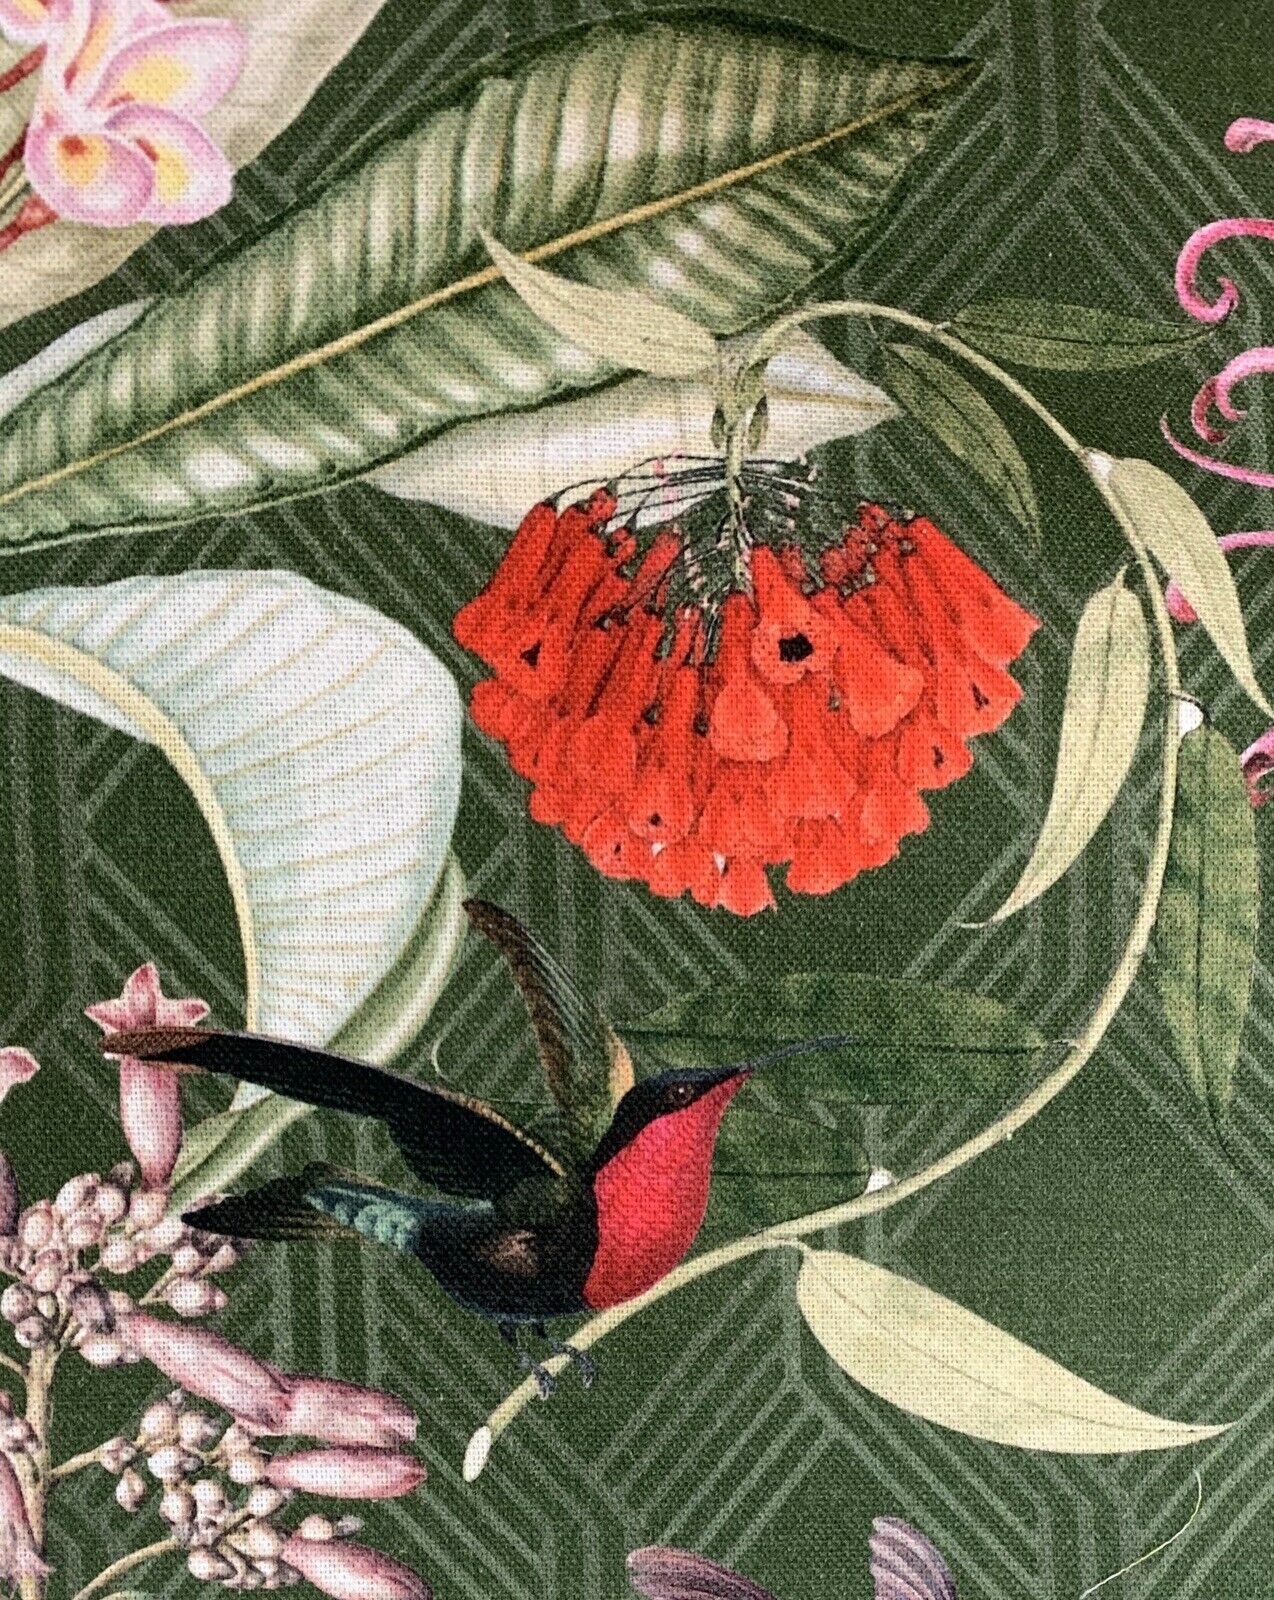 Monkey Toucan Colibri Green Botanical fabric by yard/meter Tropical Sewing Material Red Flowers Textiles Green Forest Botanical Printed Cotton